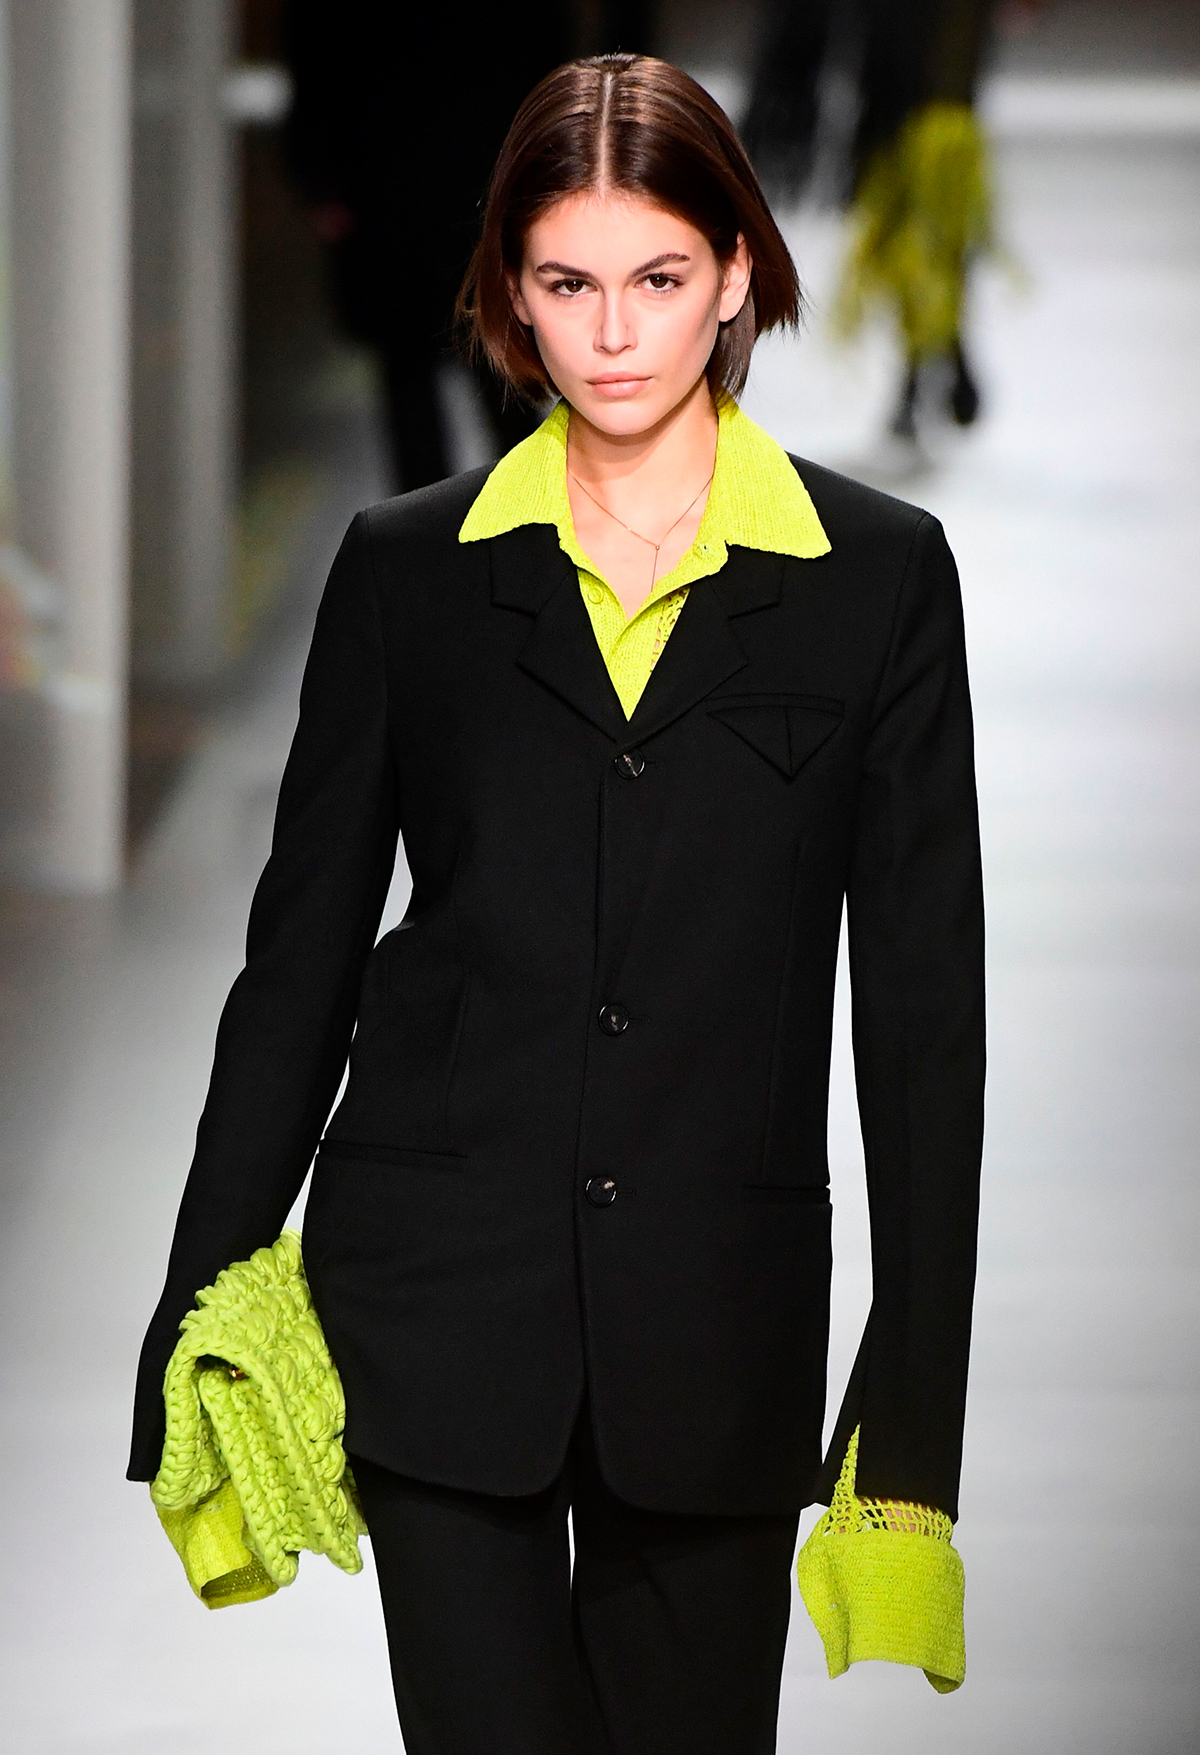 Autumn winter 2020 fashion trends: Kaia Gerber in neon green pointed collar and suit